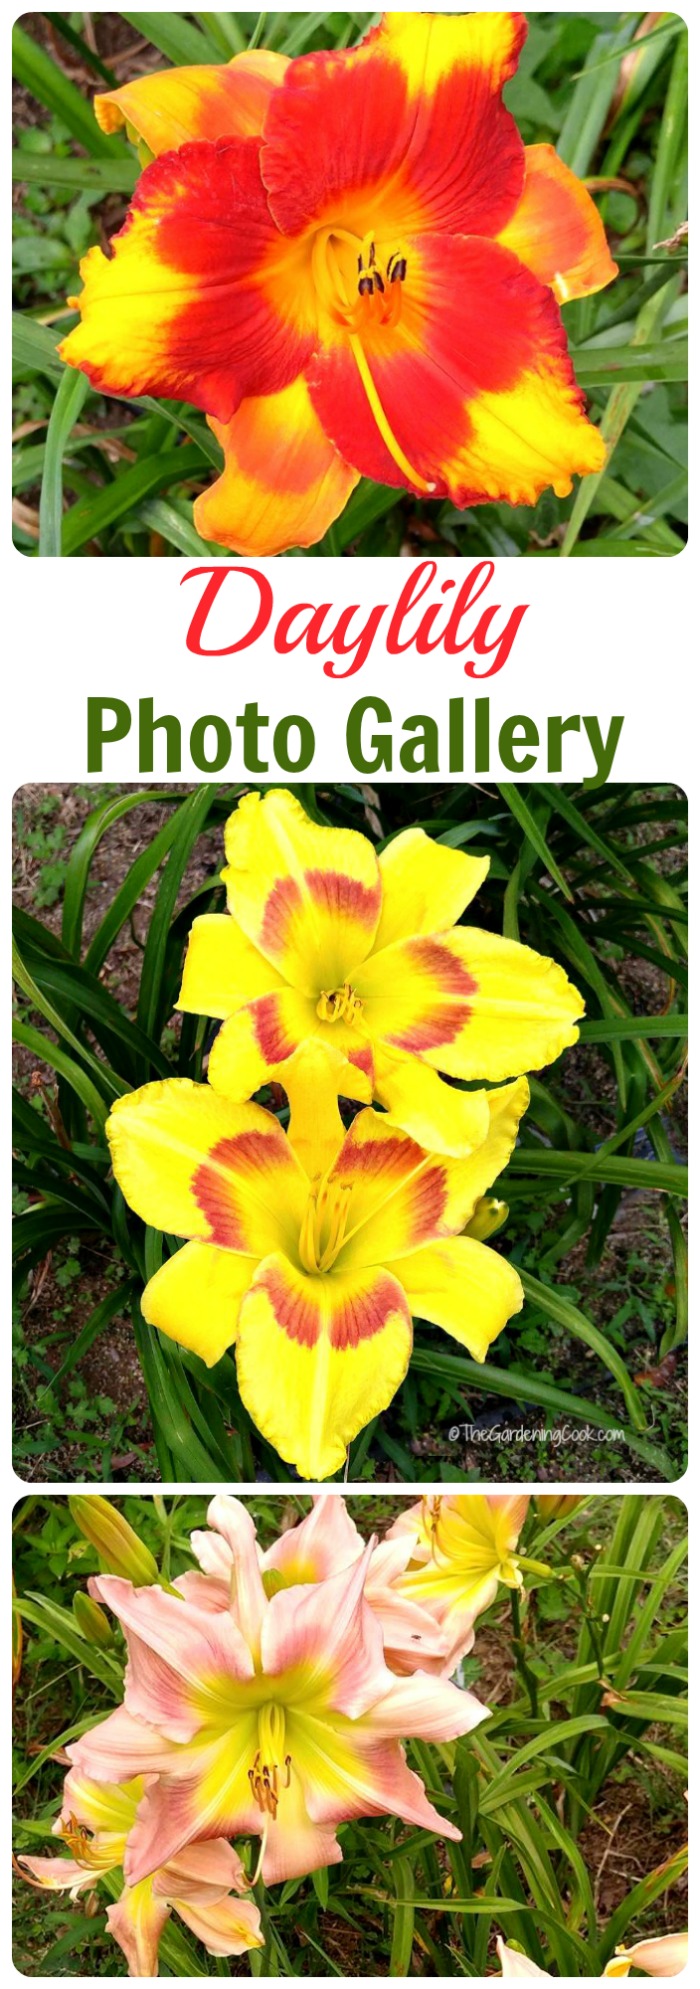 Do you love to grow daylilies? So do I. This daylily photo gallery gives names of many varieties of this gorgeous perennial thegardeningcook.com